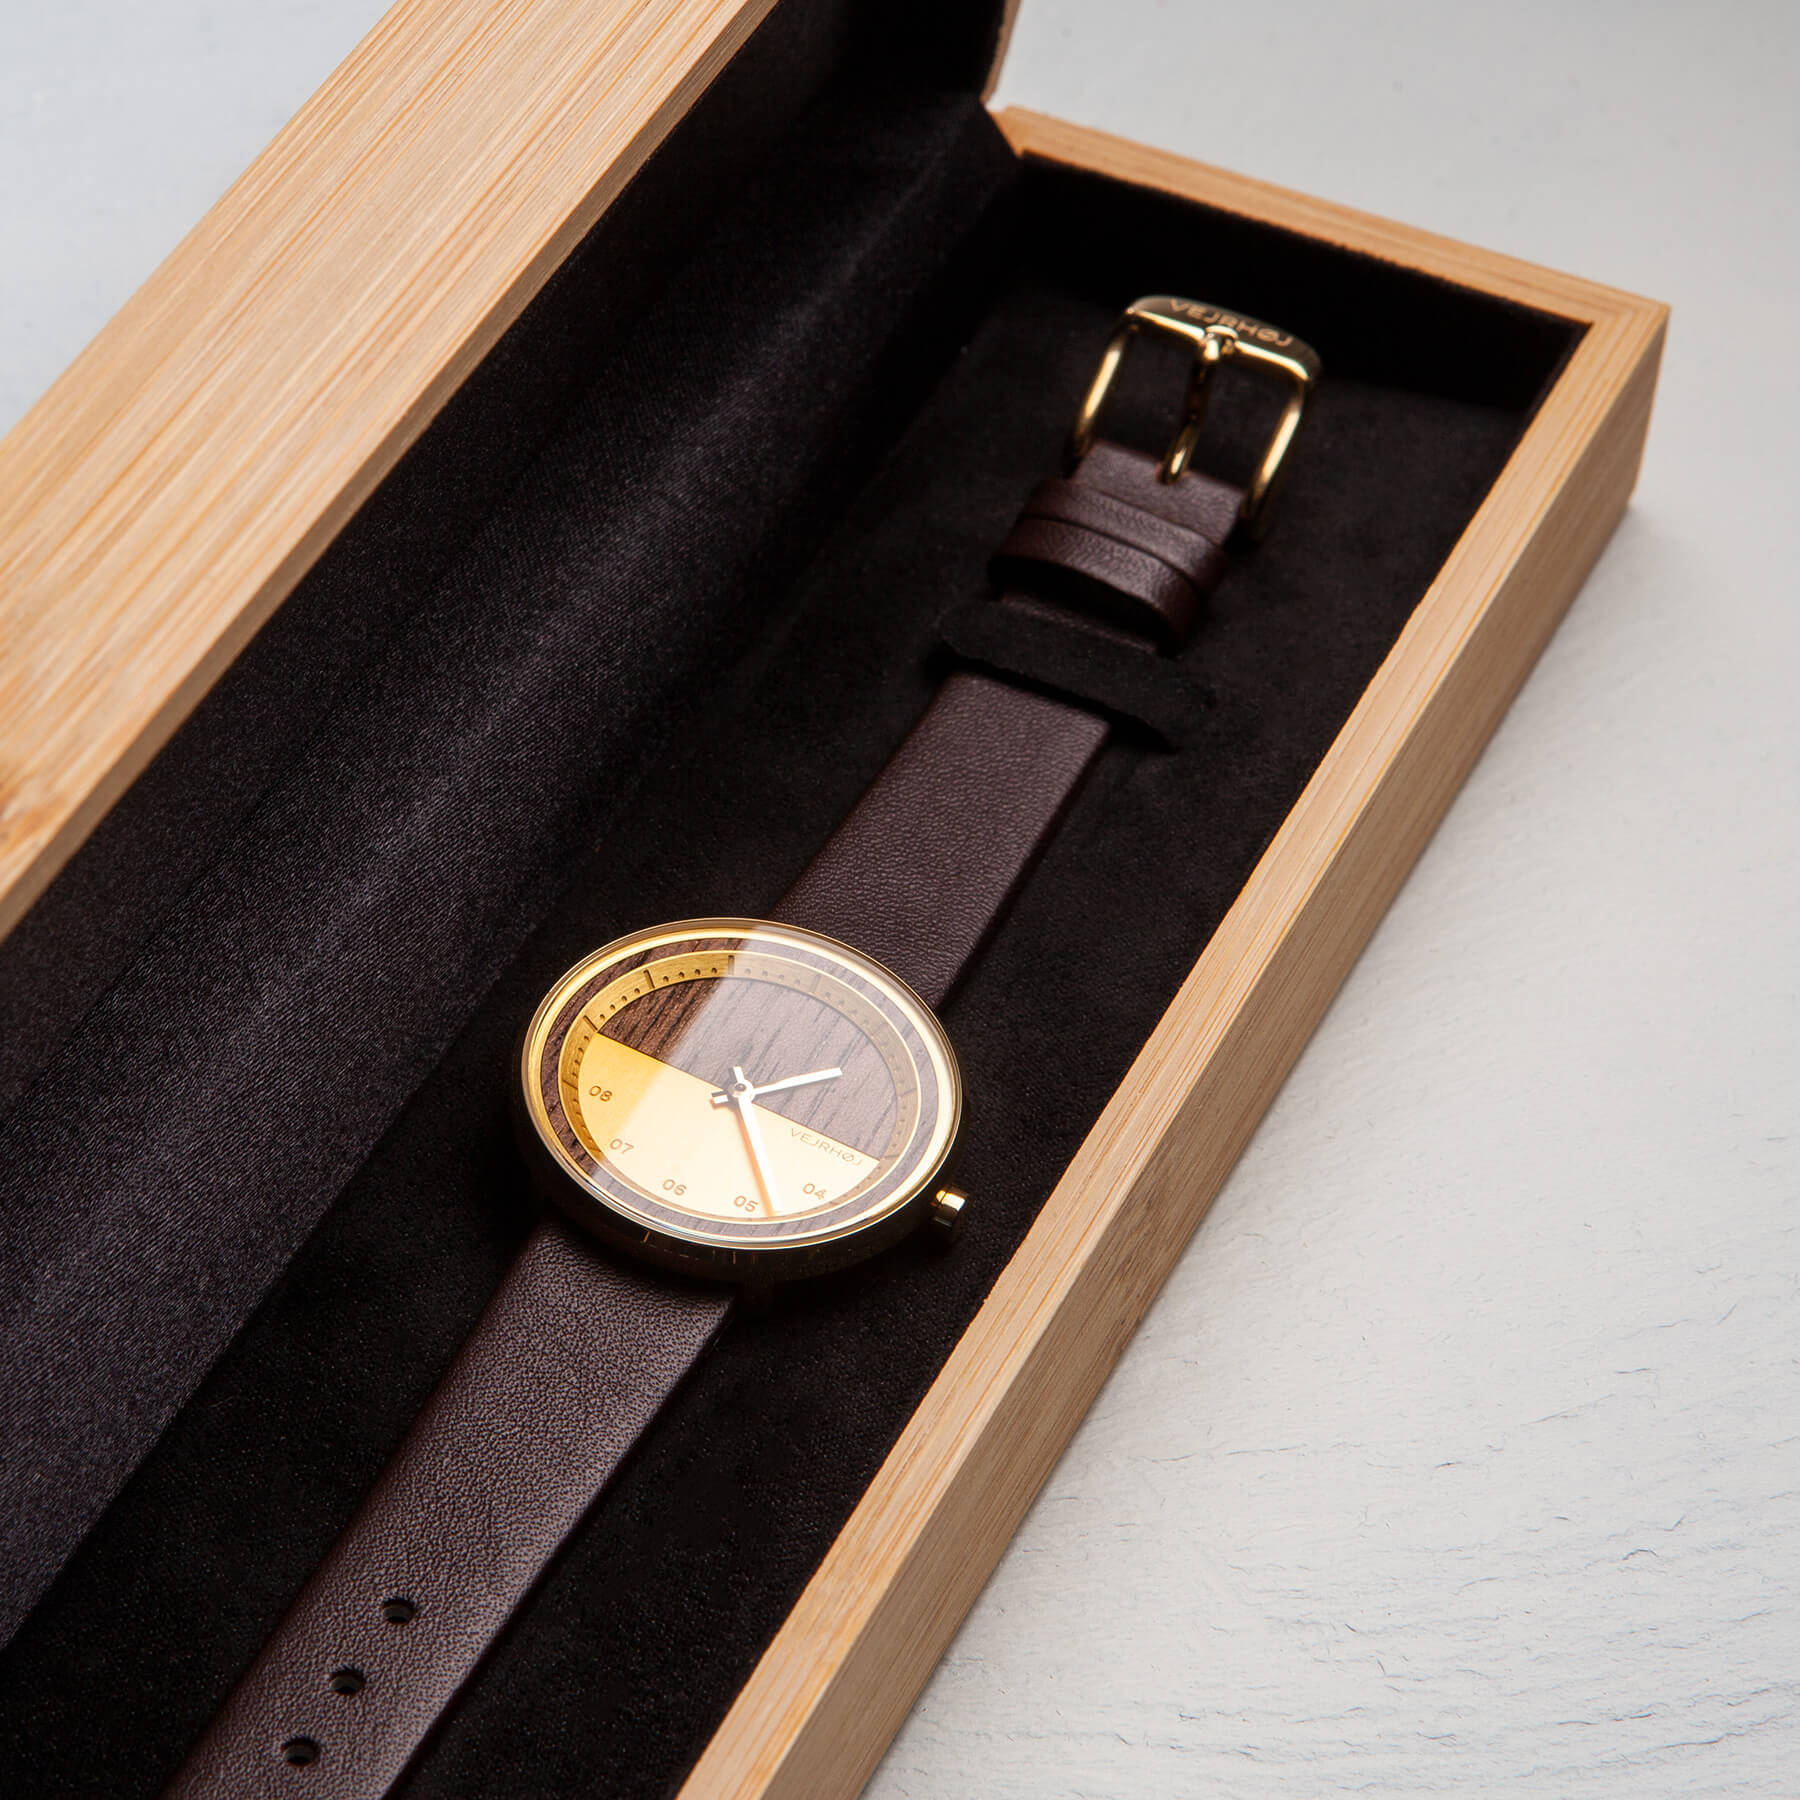 Gold and wood watch for women in a wooden box